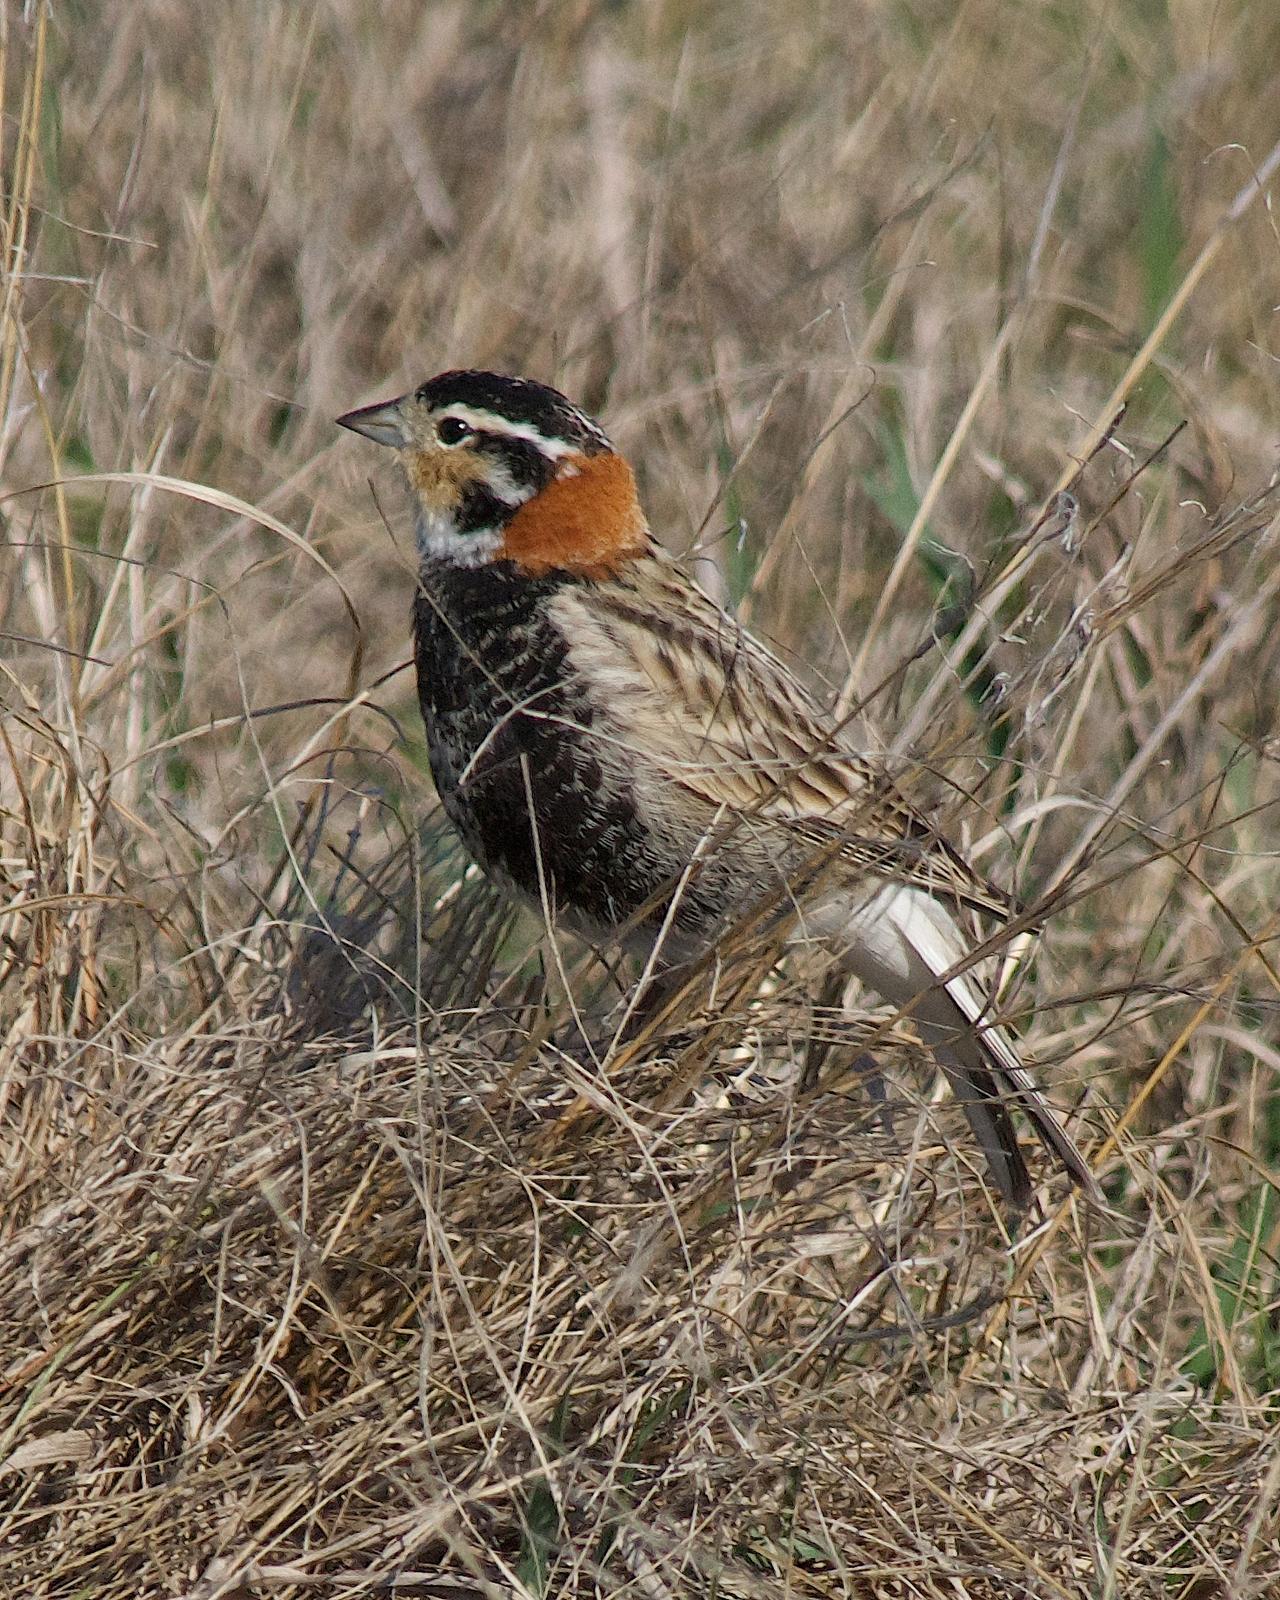 Chestnut-collared Longspur Photo by Gerald Hoekstra